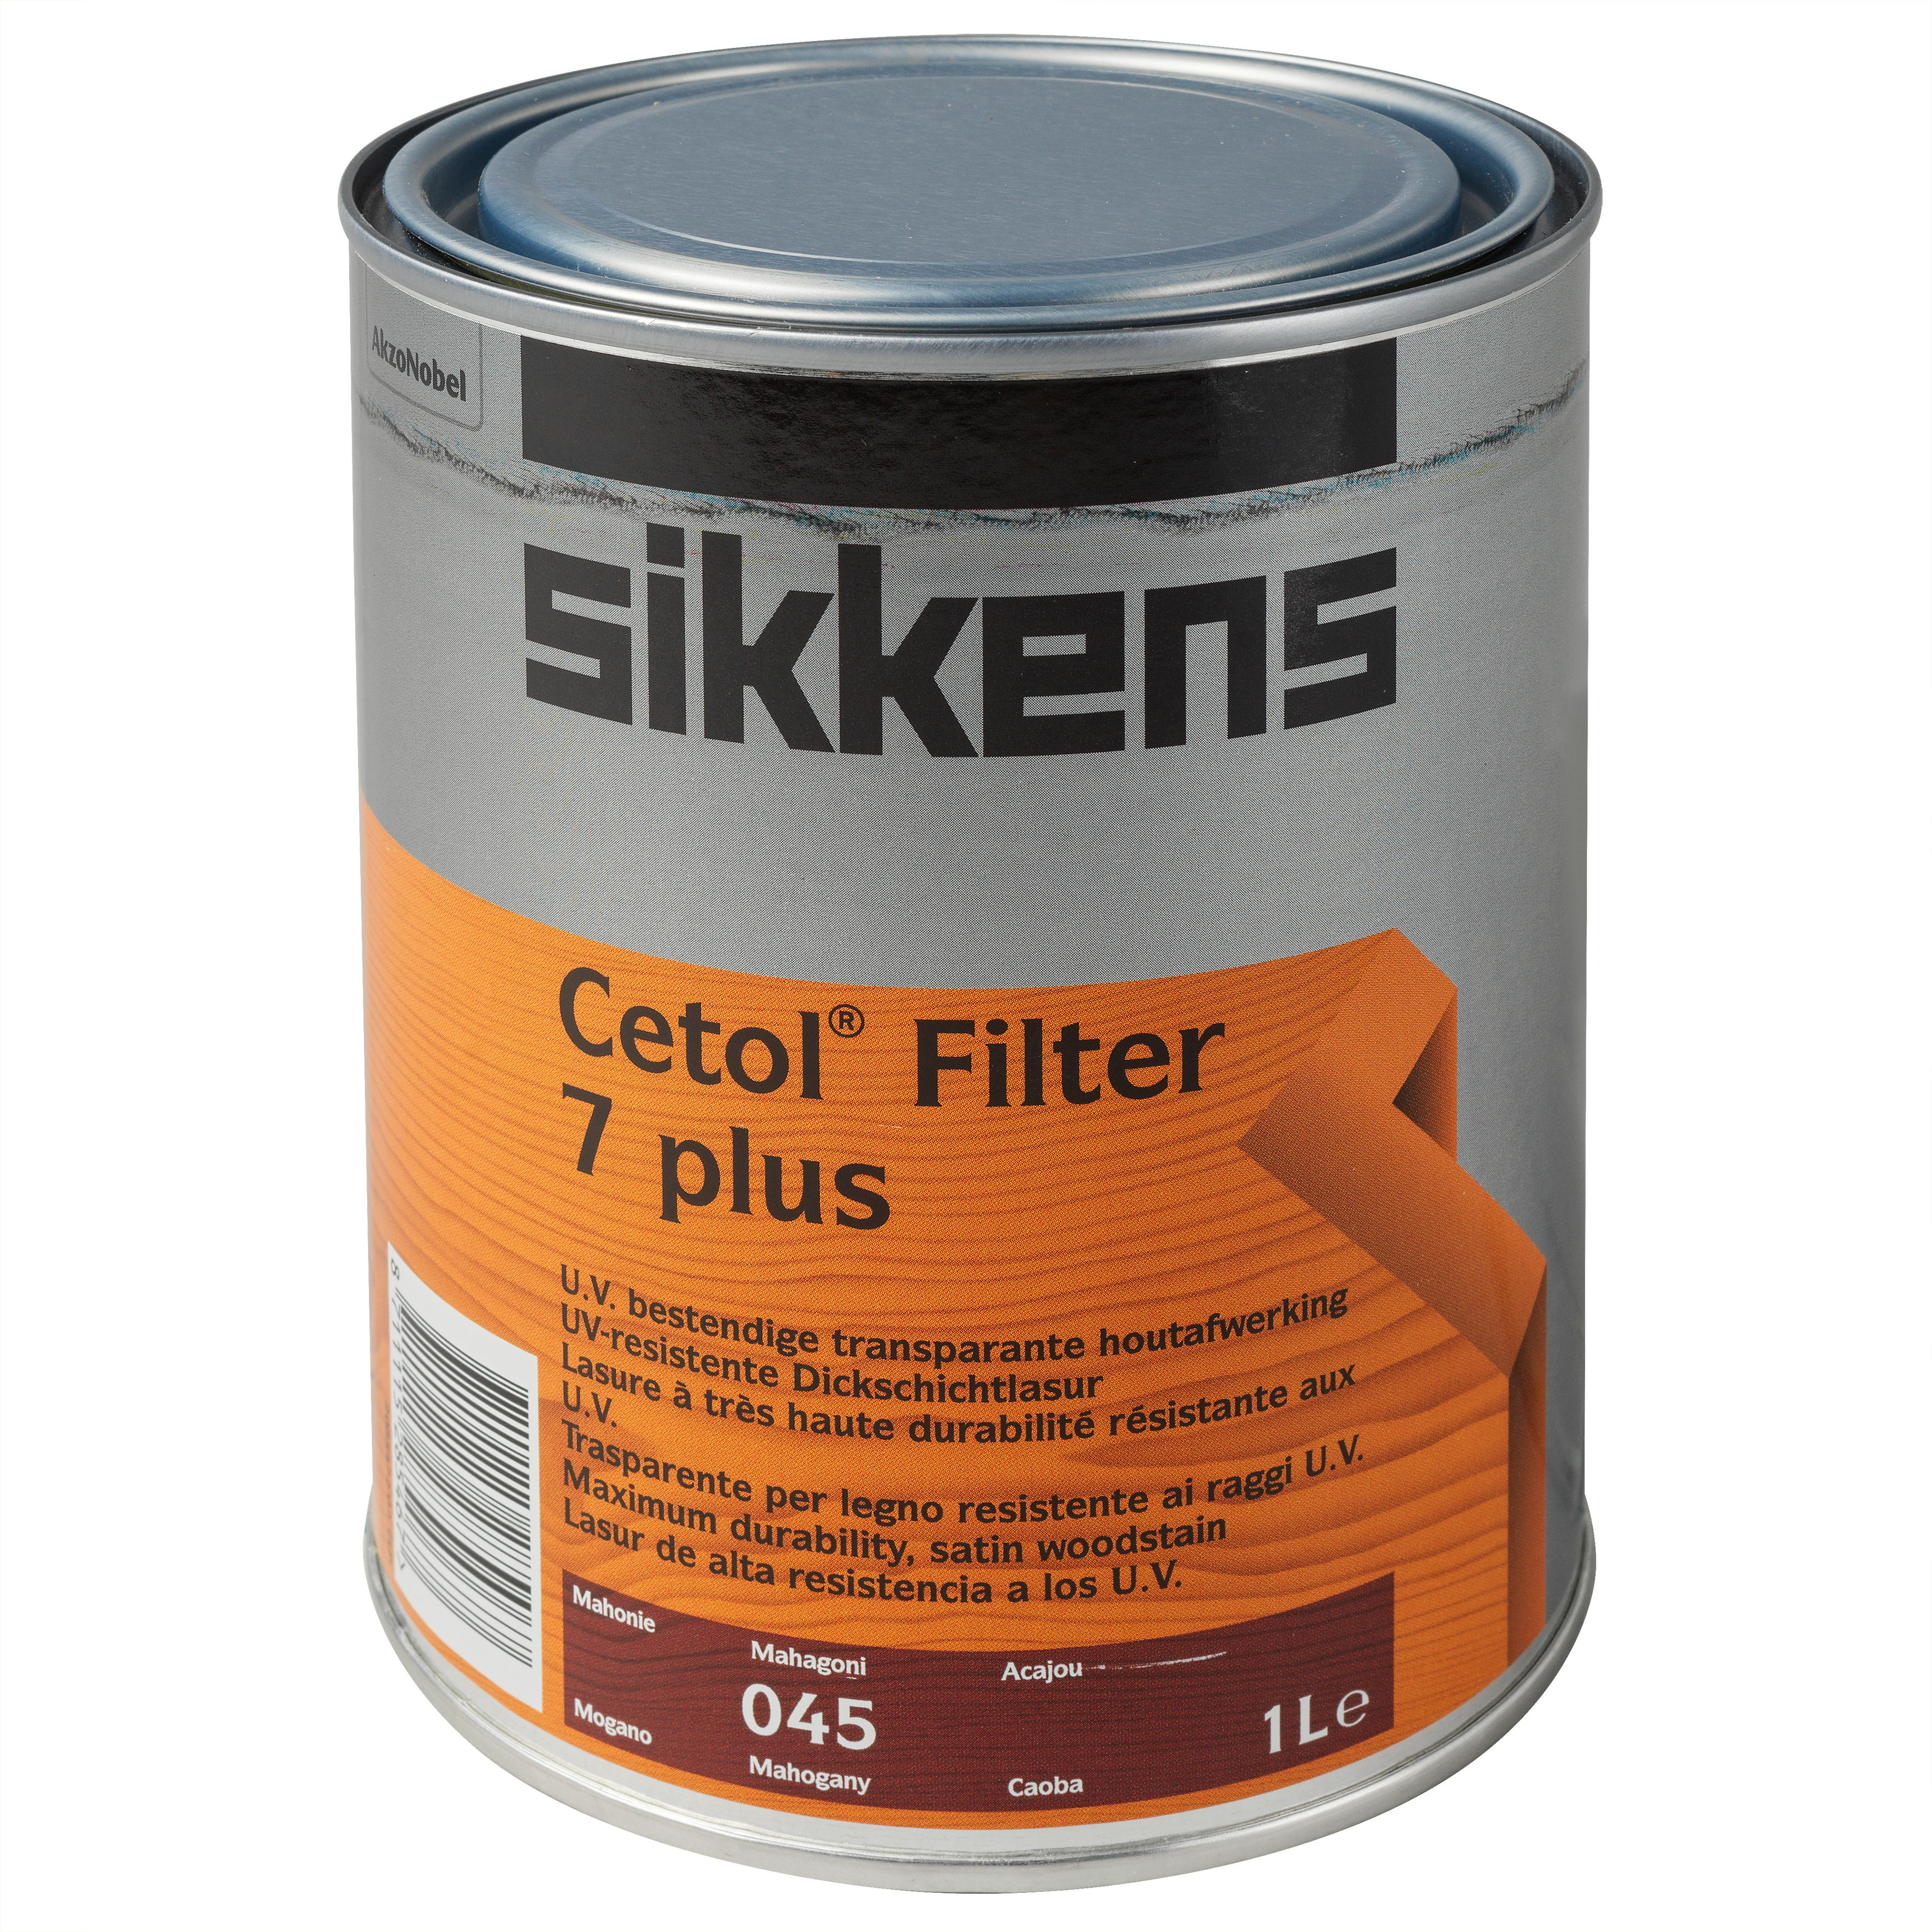 Sikkens Cetol Filter 7 Plus Wood Stain – Mahogany 045 (1L)